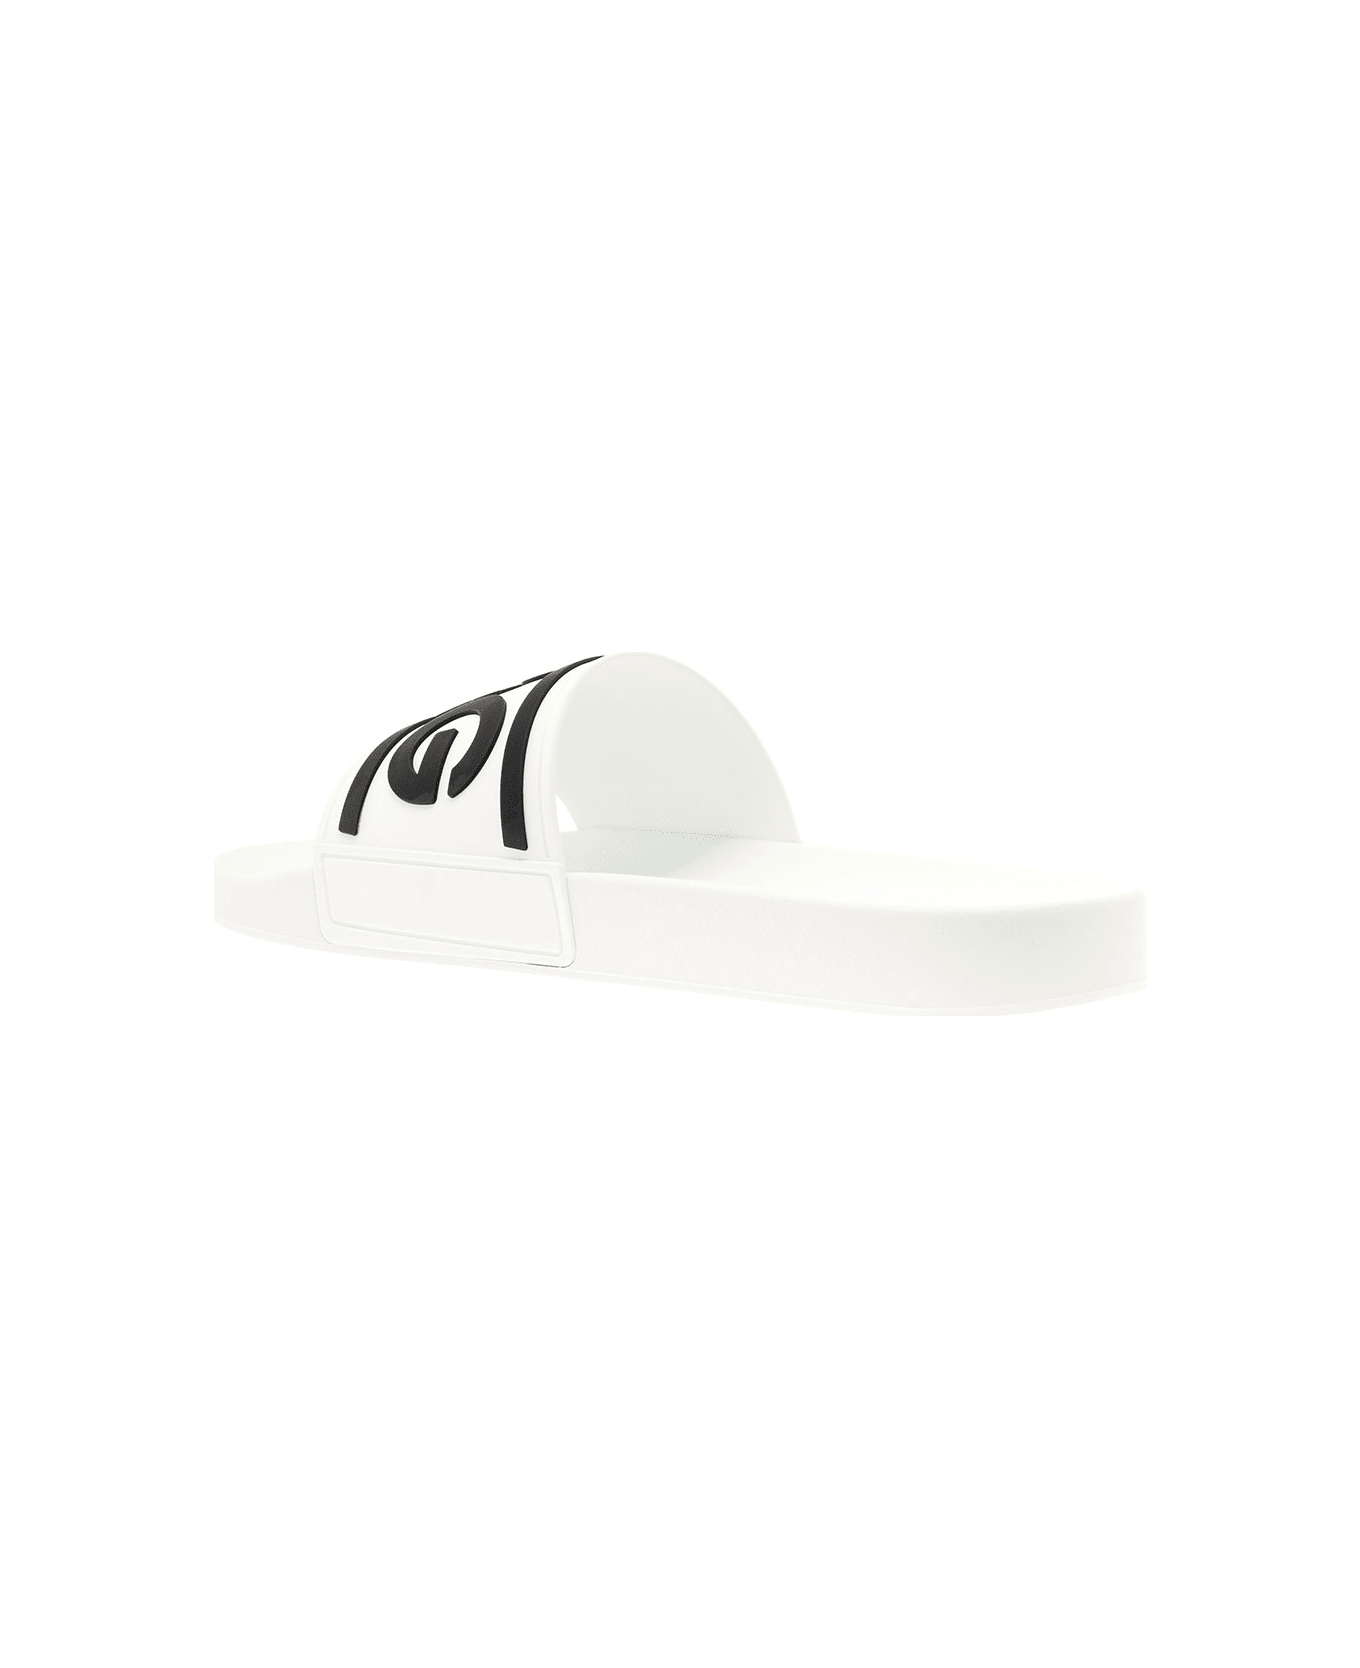 Dolce & Gabbana White Pool Slide In Rubber With Embossed Logo Dolce& Gabbana Man - White/black その他各種シューズ